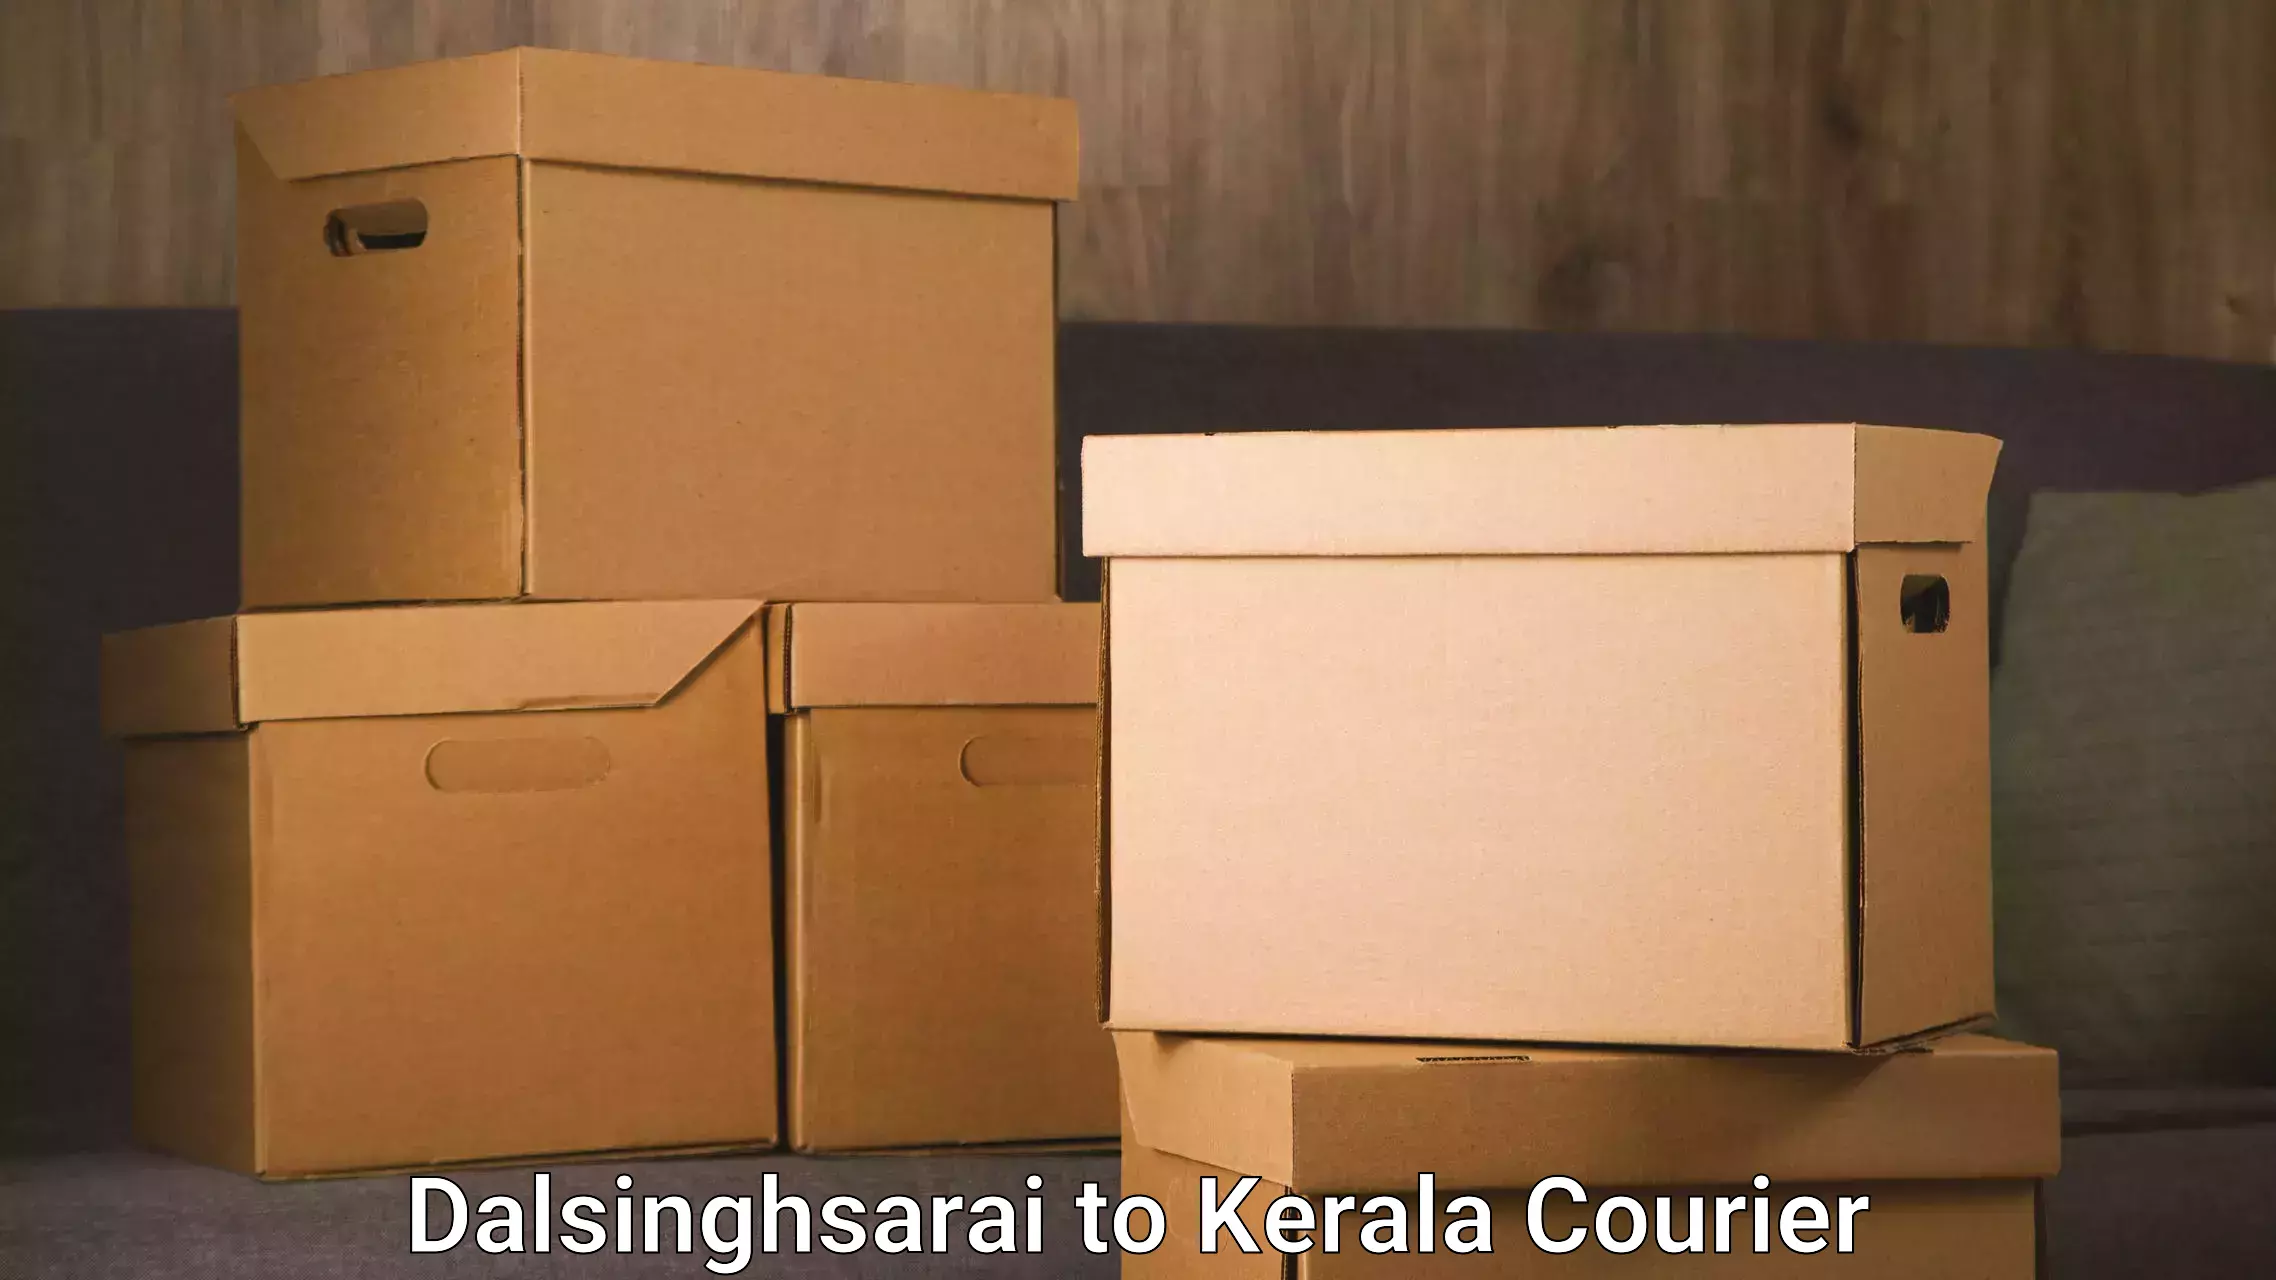 Affordable relocation services Dalsinghsarai to Cochin University of Science and Technology